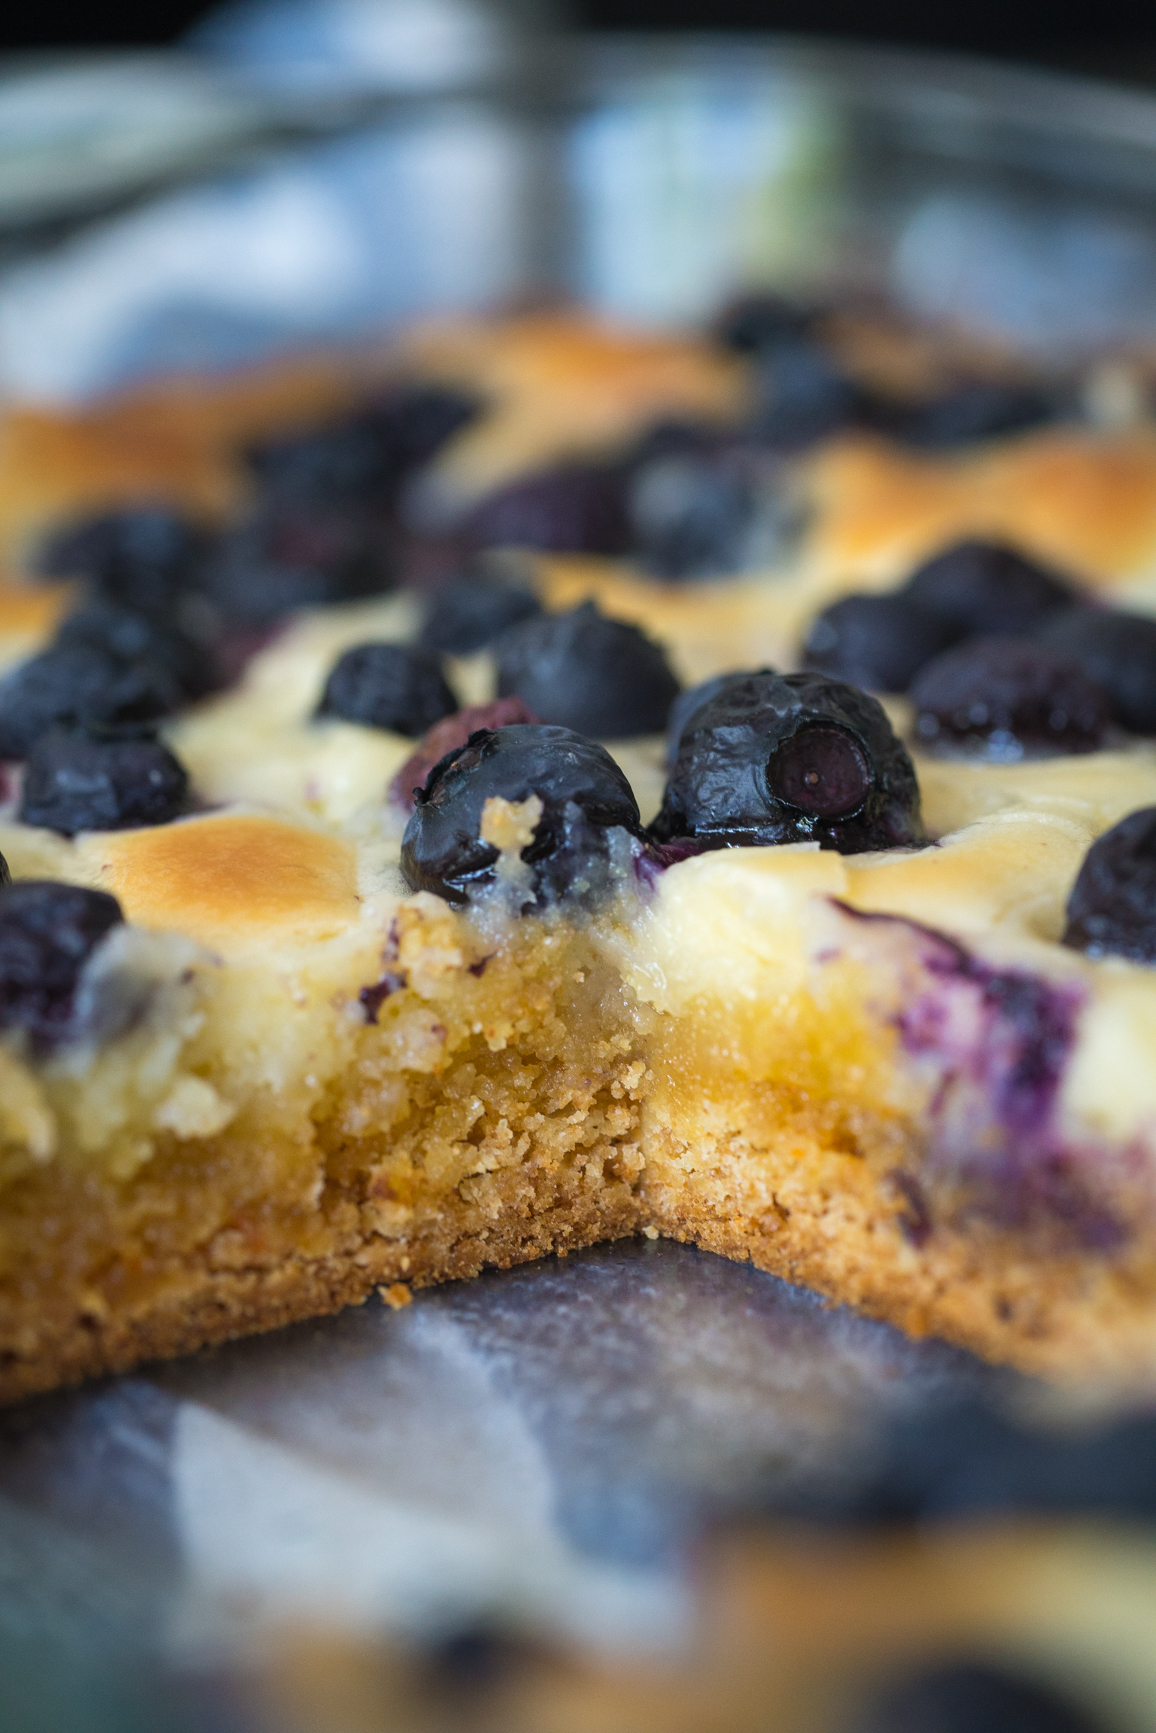 Kentucky Butter Cake with Blueberries | FaveSouthernRecipes.com